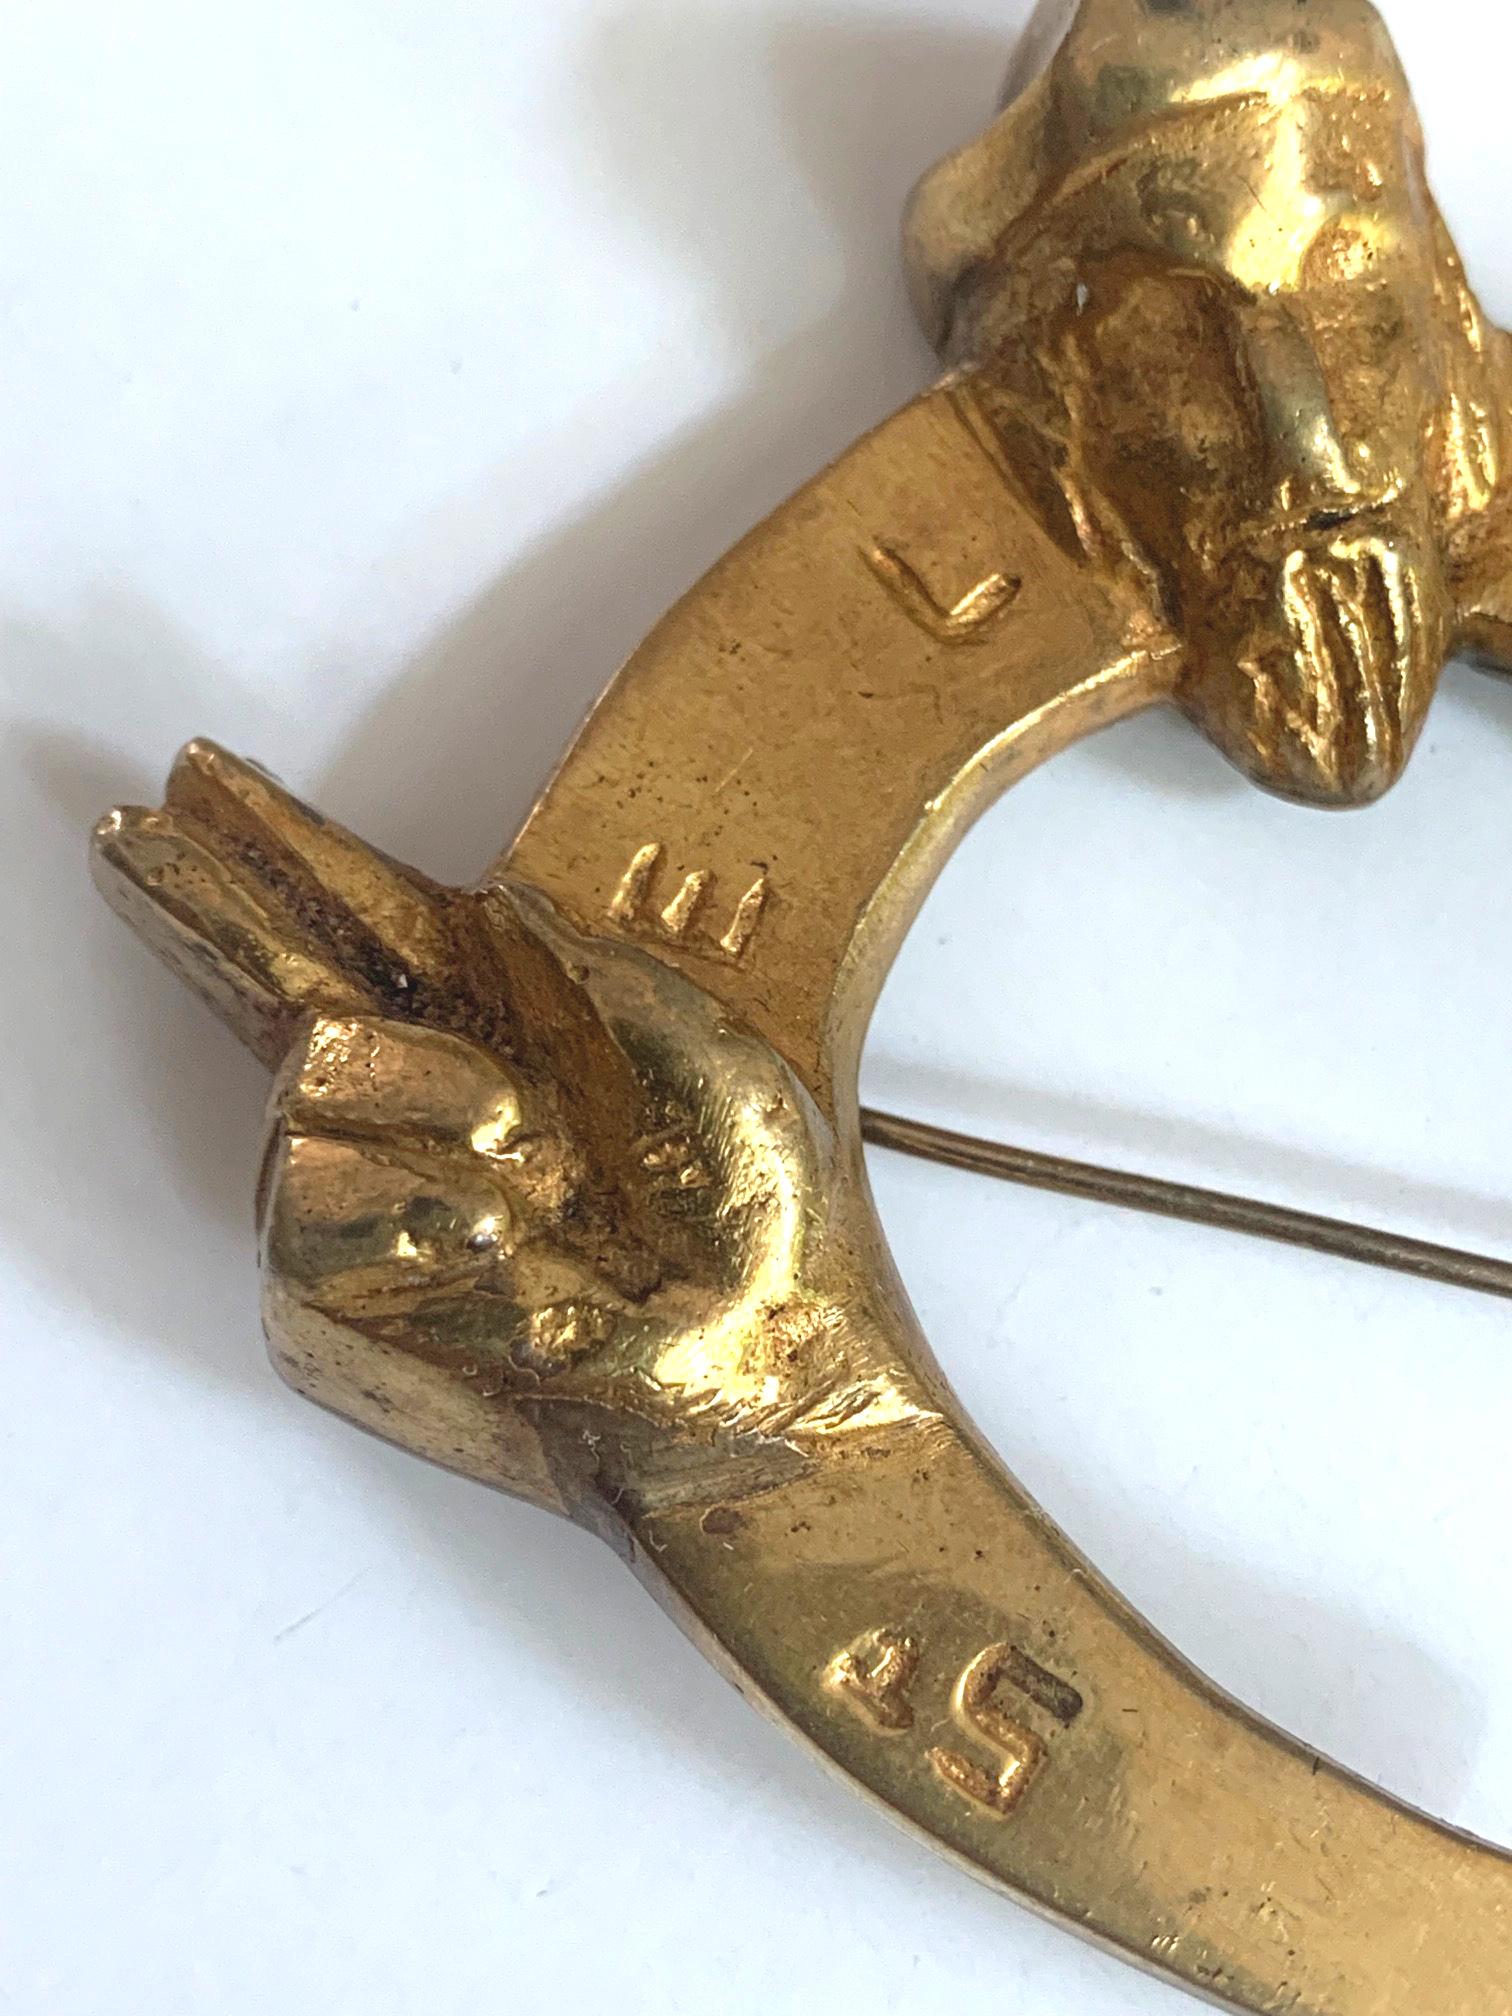 A rare bronze brooch St Eloi by Parisian art jeweler Line Vautrin ((French, 1913–1997) circa 1946. Brilliantly designed in the shape of horseshoe with the saint spreading his arms holding the attribute. With St Eloi carved in the front. Marked on